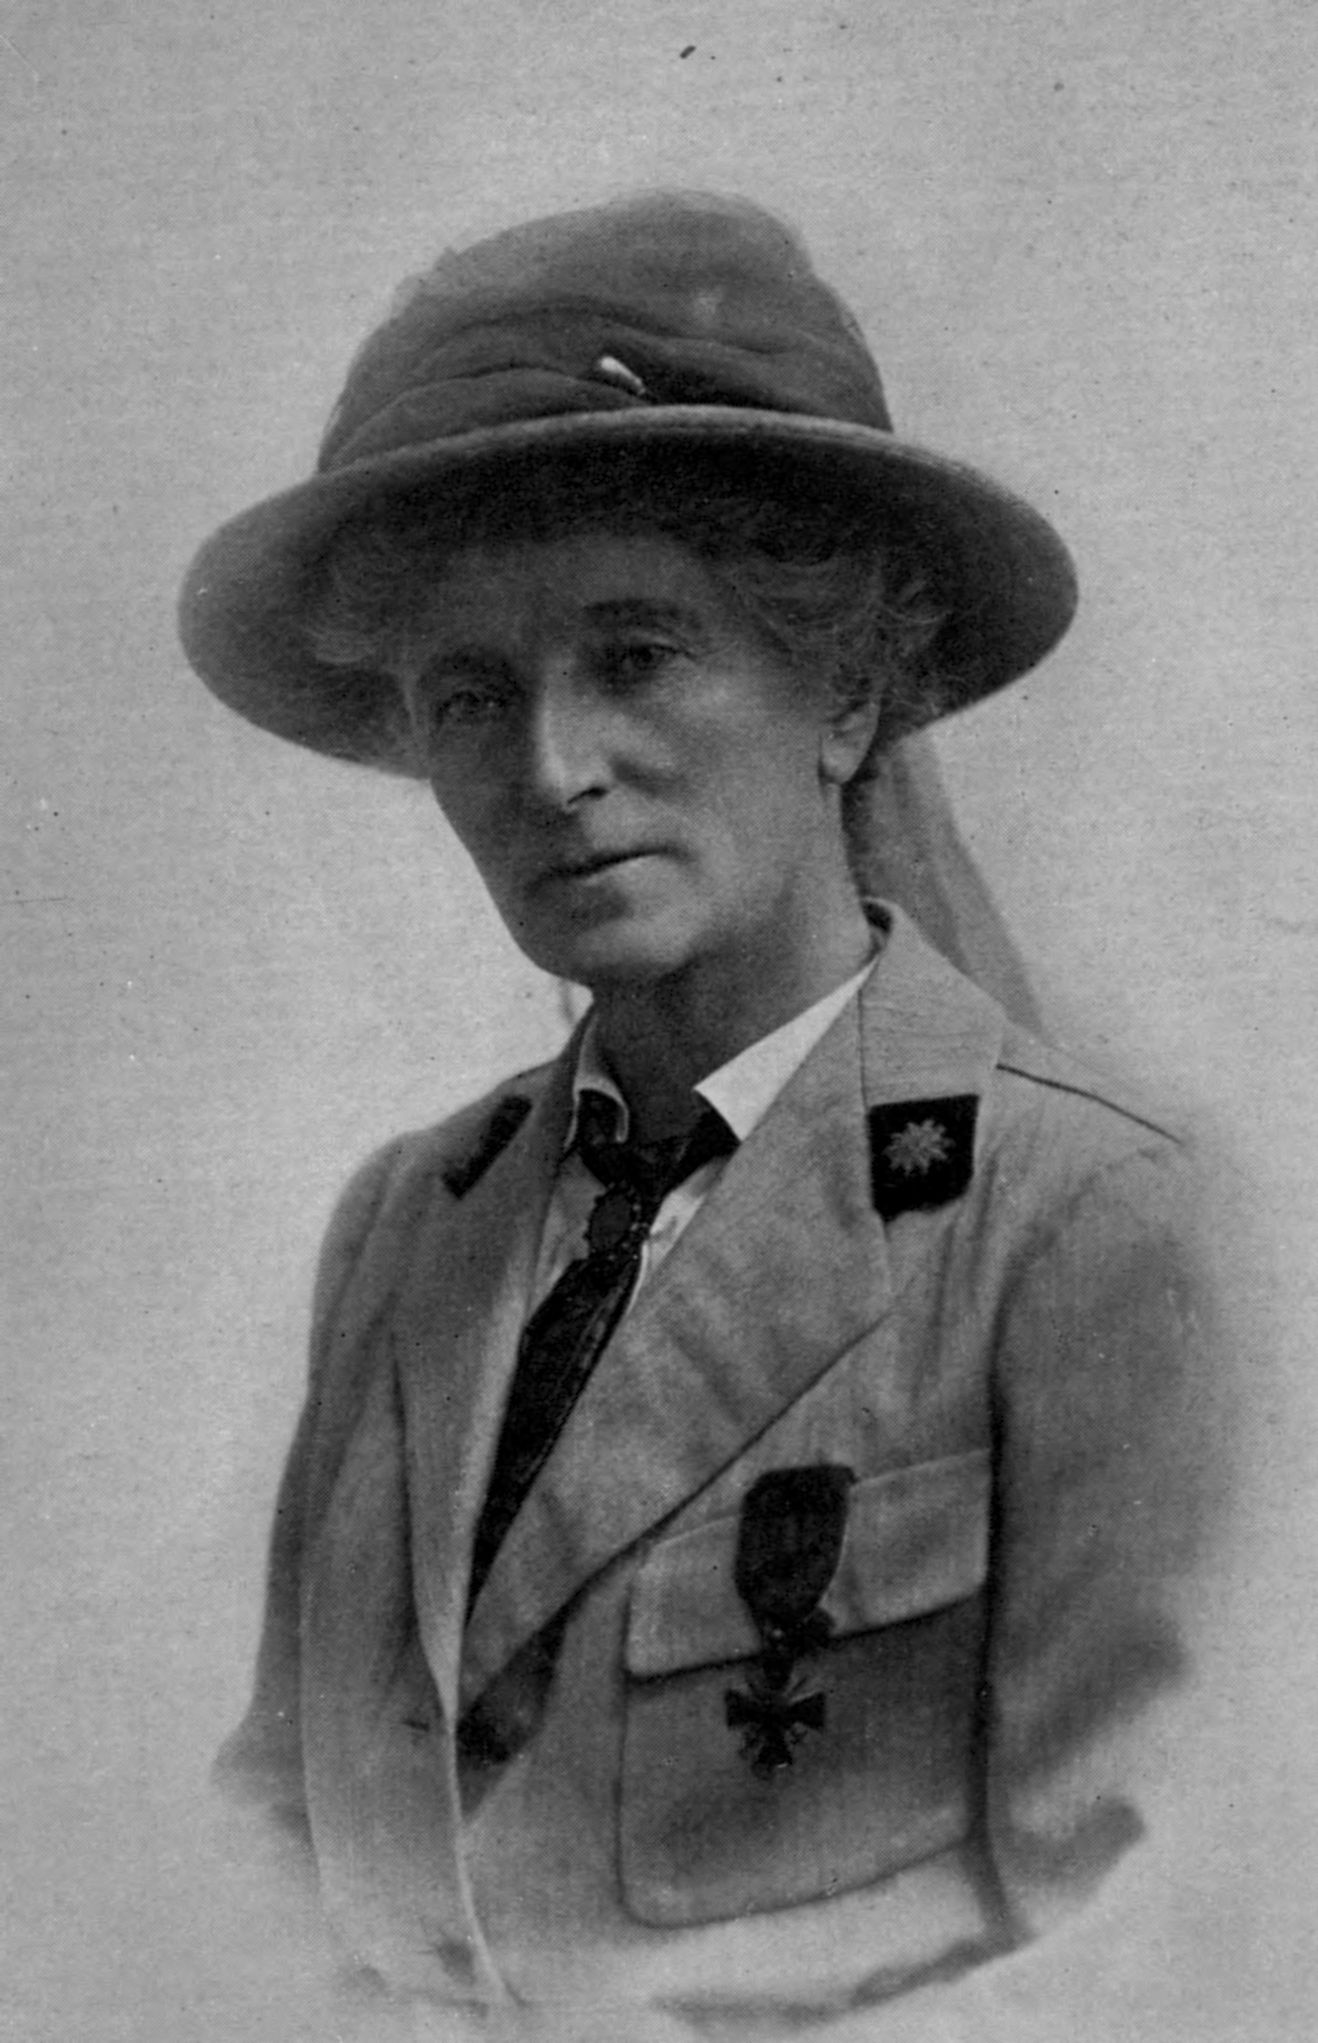 Black and white portrait of Suffragette Katherine Harley.